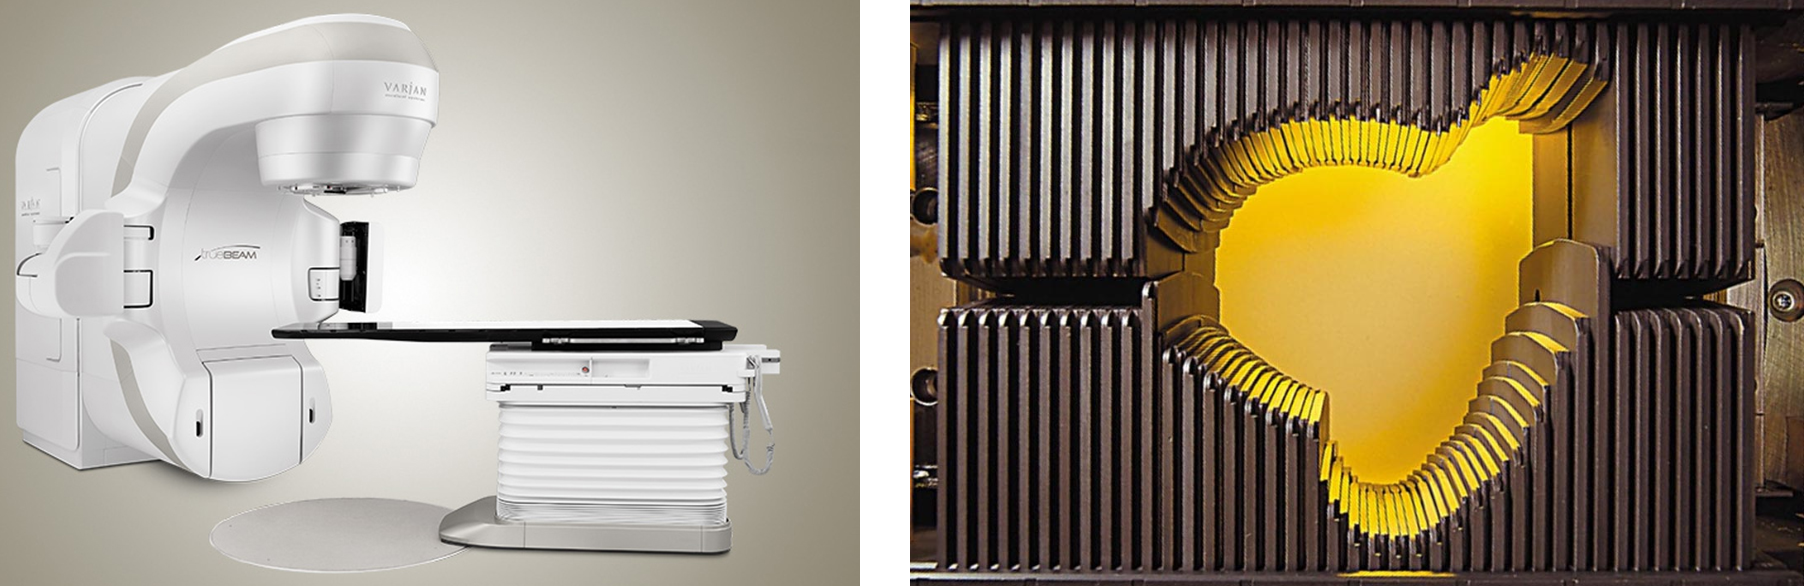 Left: A modern linear accelerator able to deliver volumetric modulated arc therapy. Right: A Multi Leaf Collimator (MLC) system. The leaves can move in and out of the beam's field, shaping the delivered dose.